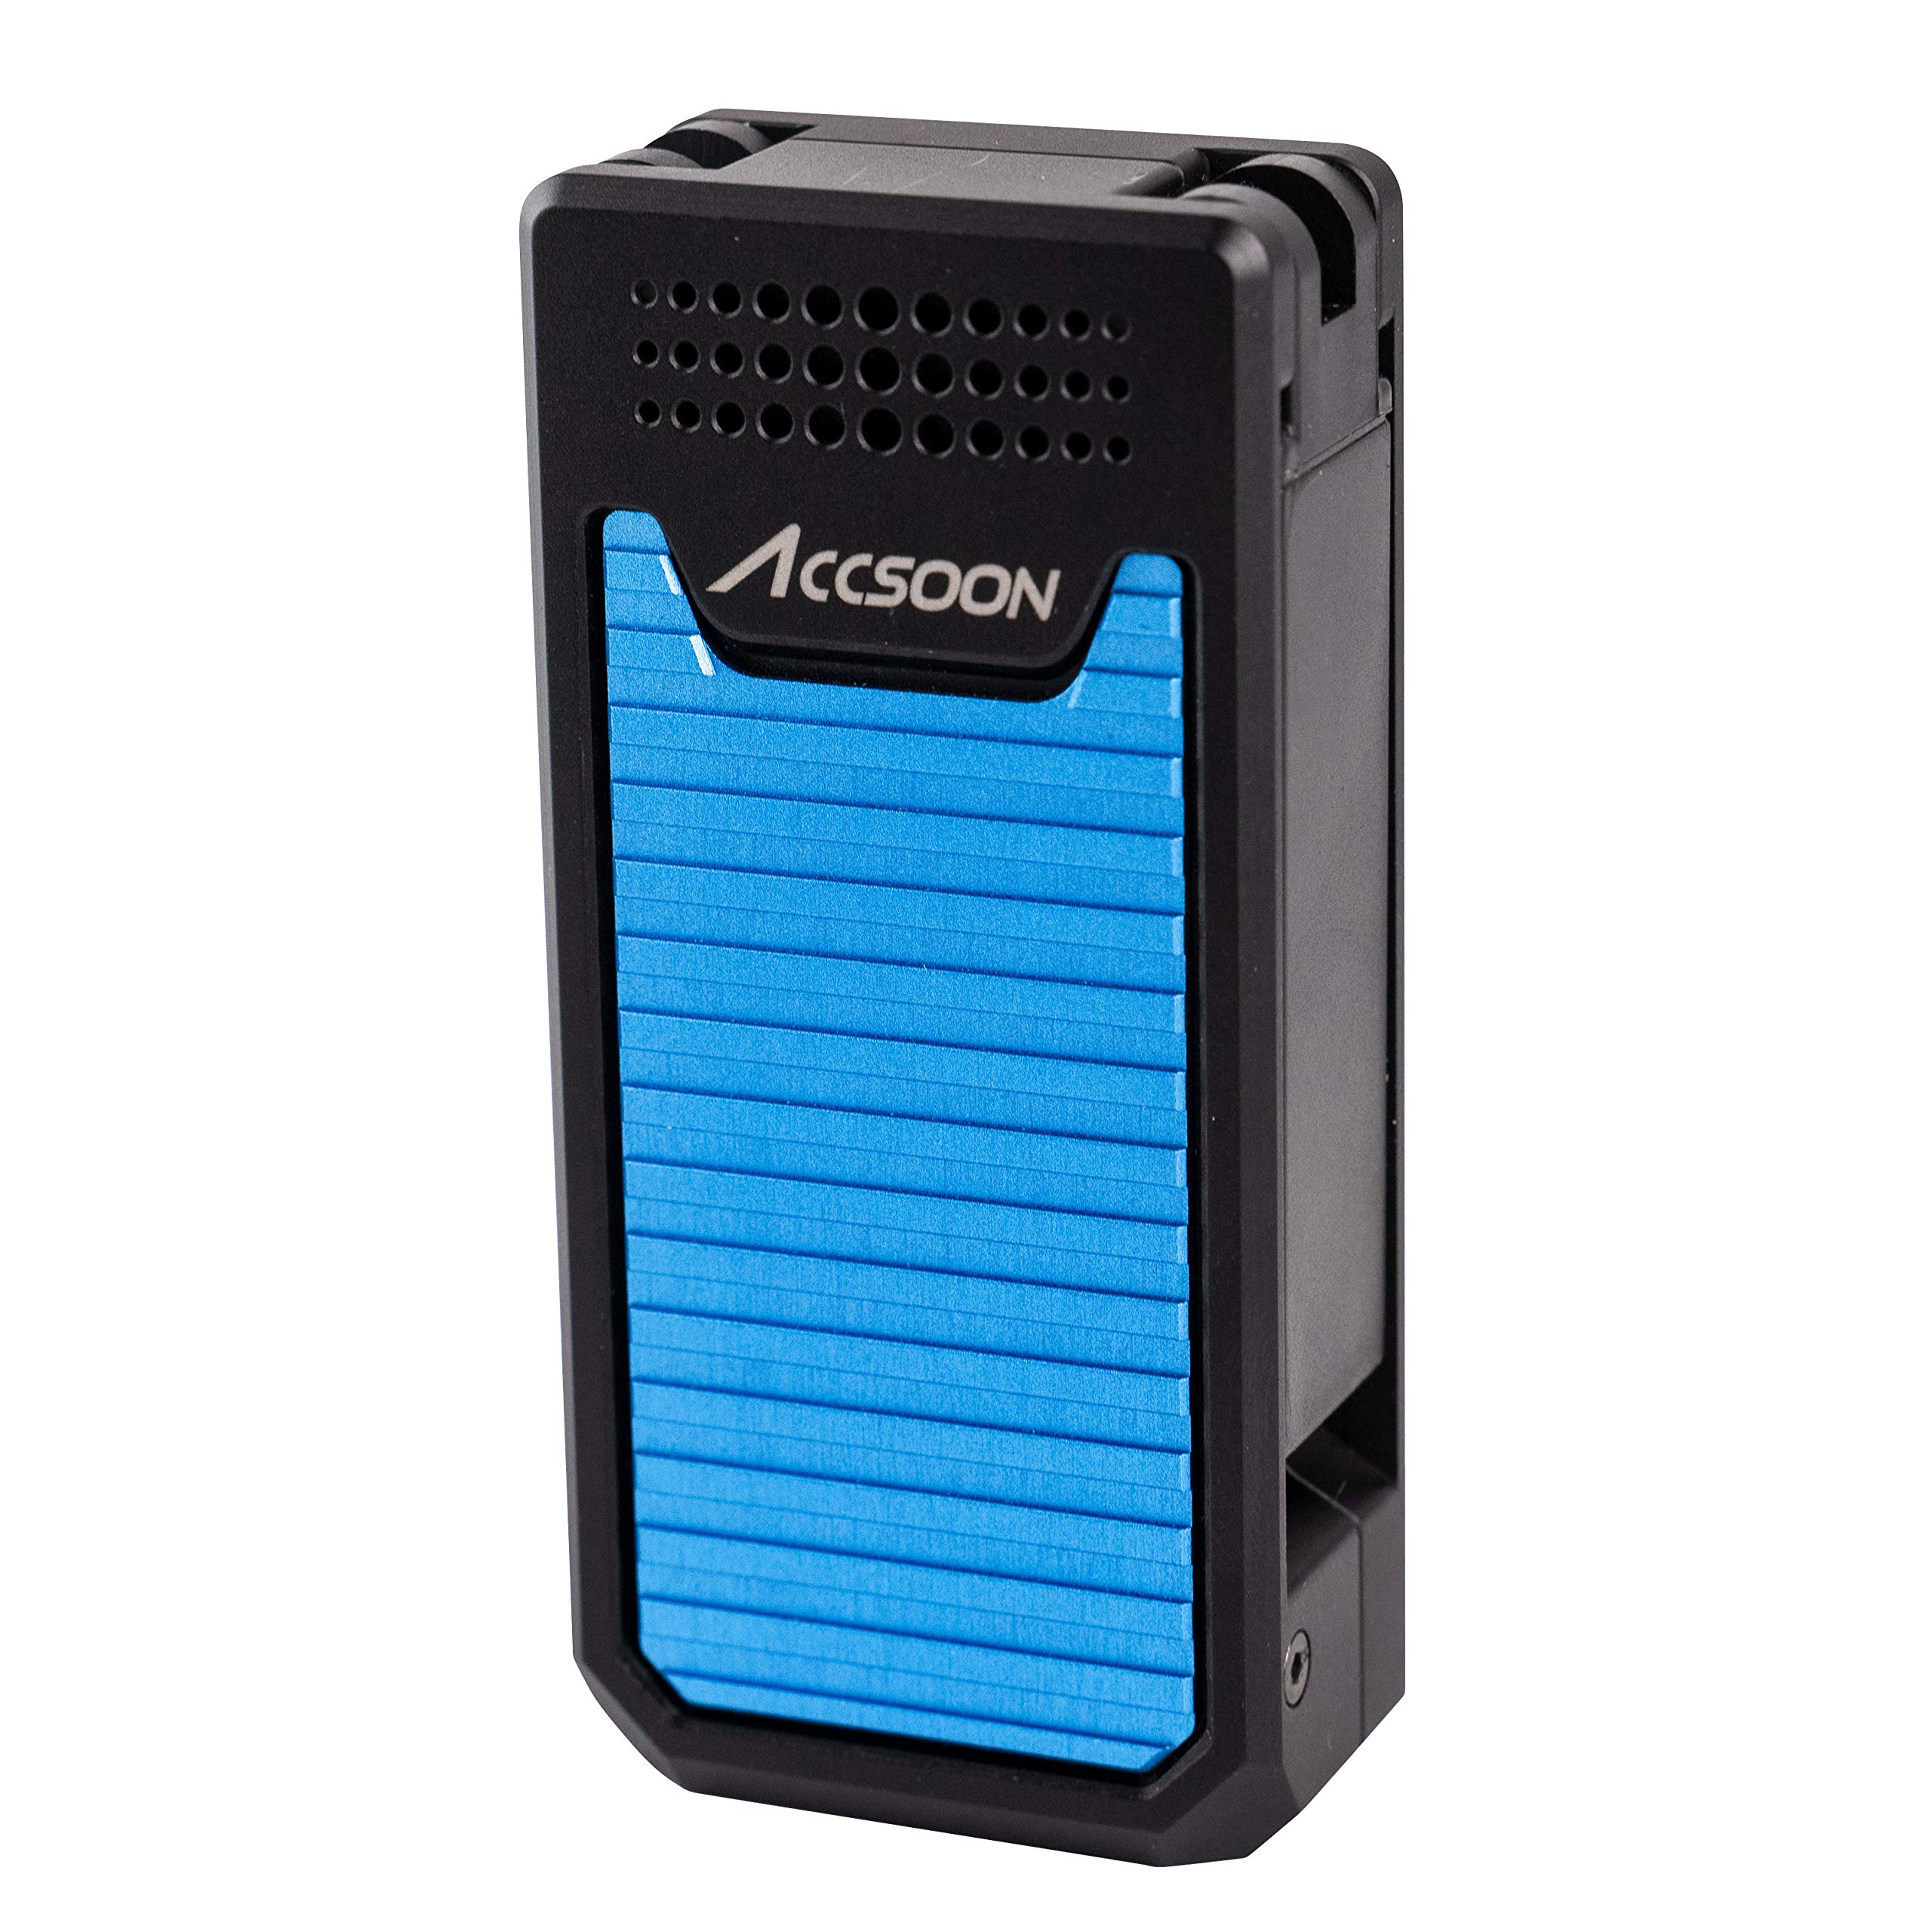 Accsoon CineEye Air 5 GHz Wireless Video Transmitter for up to 2 Mobile Devices (CINEEYEAIR)